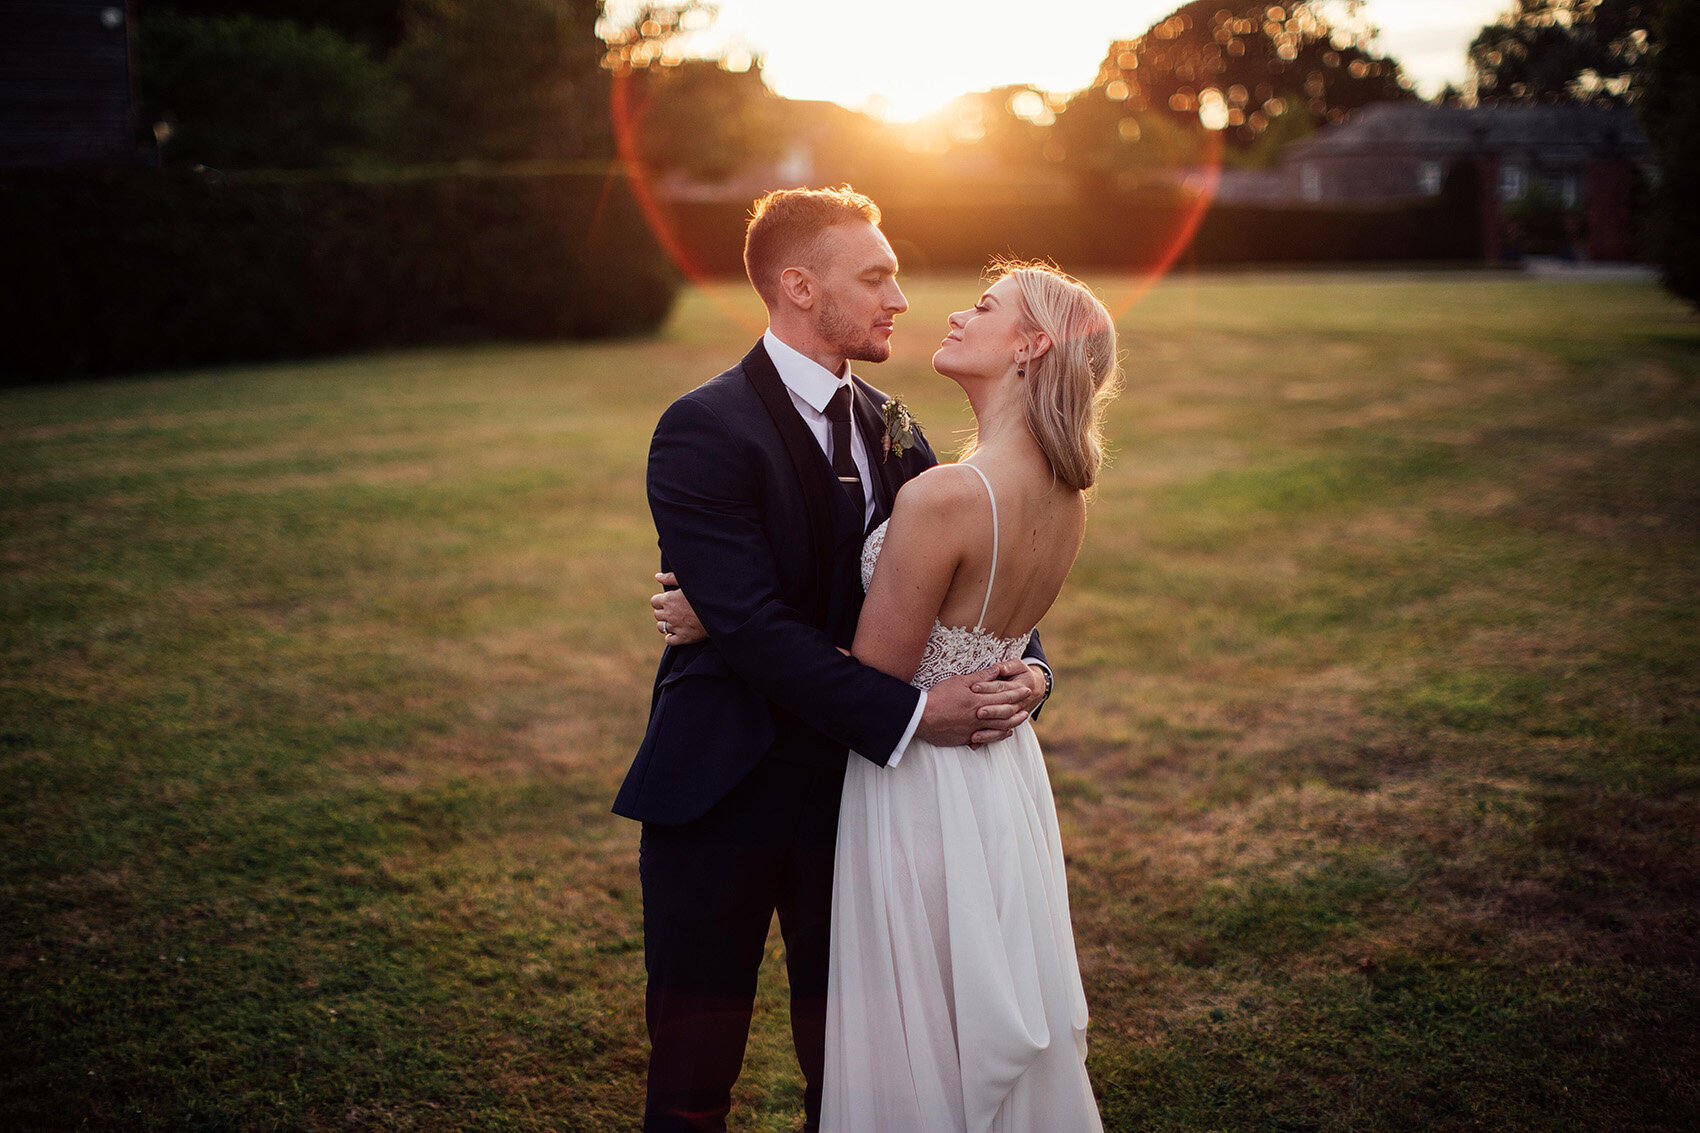 Bride and groom golden hour portrait by Harry Michael Photography